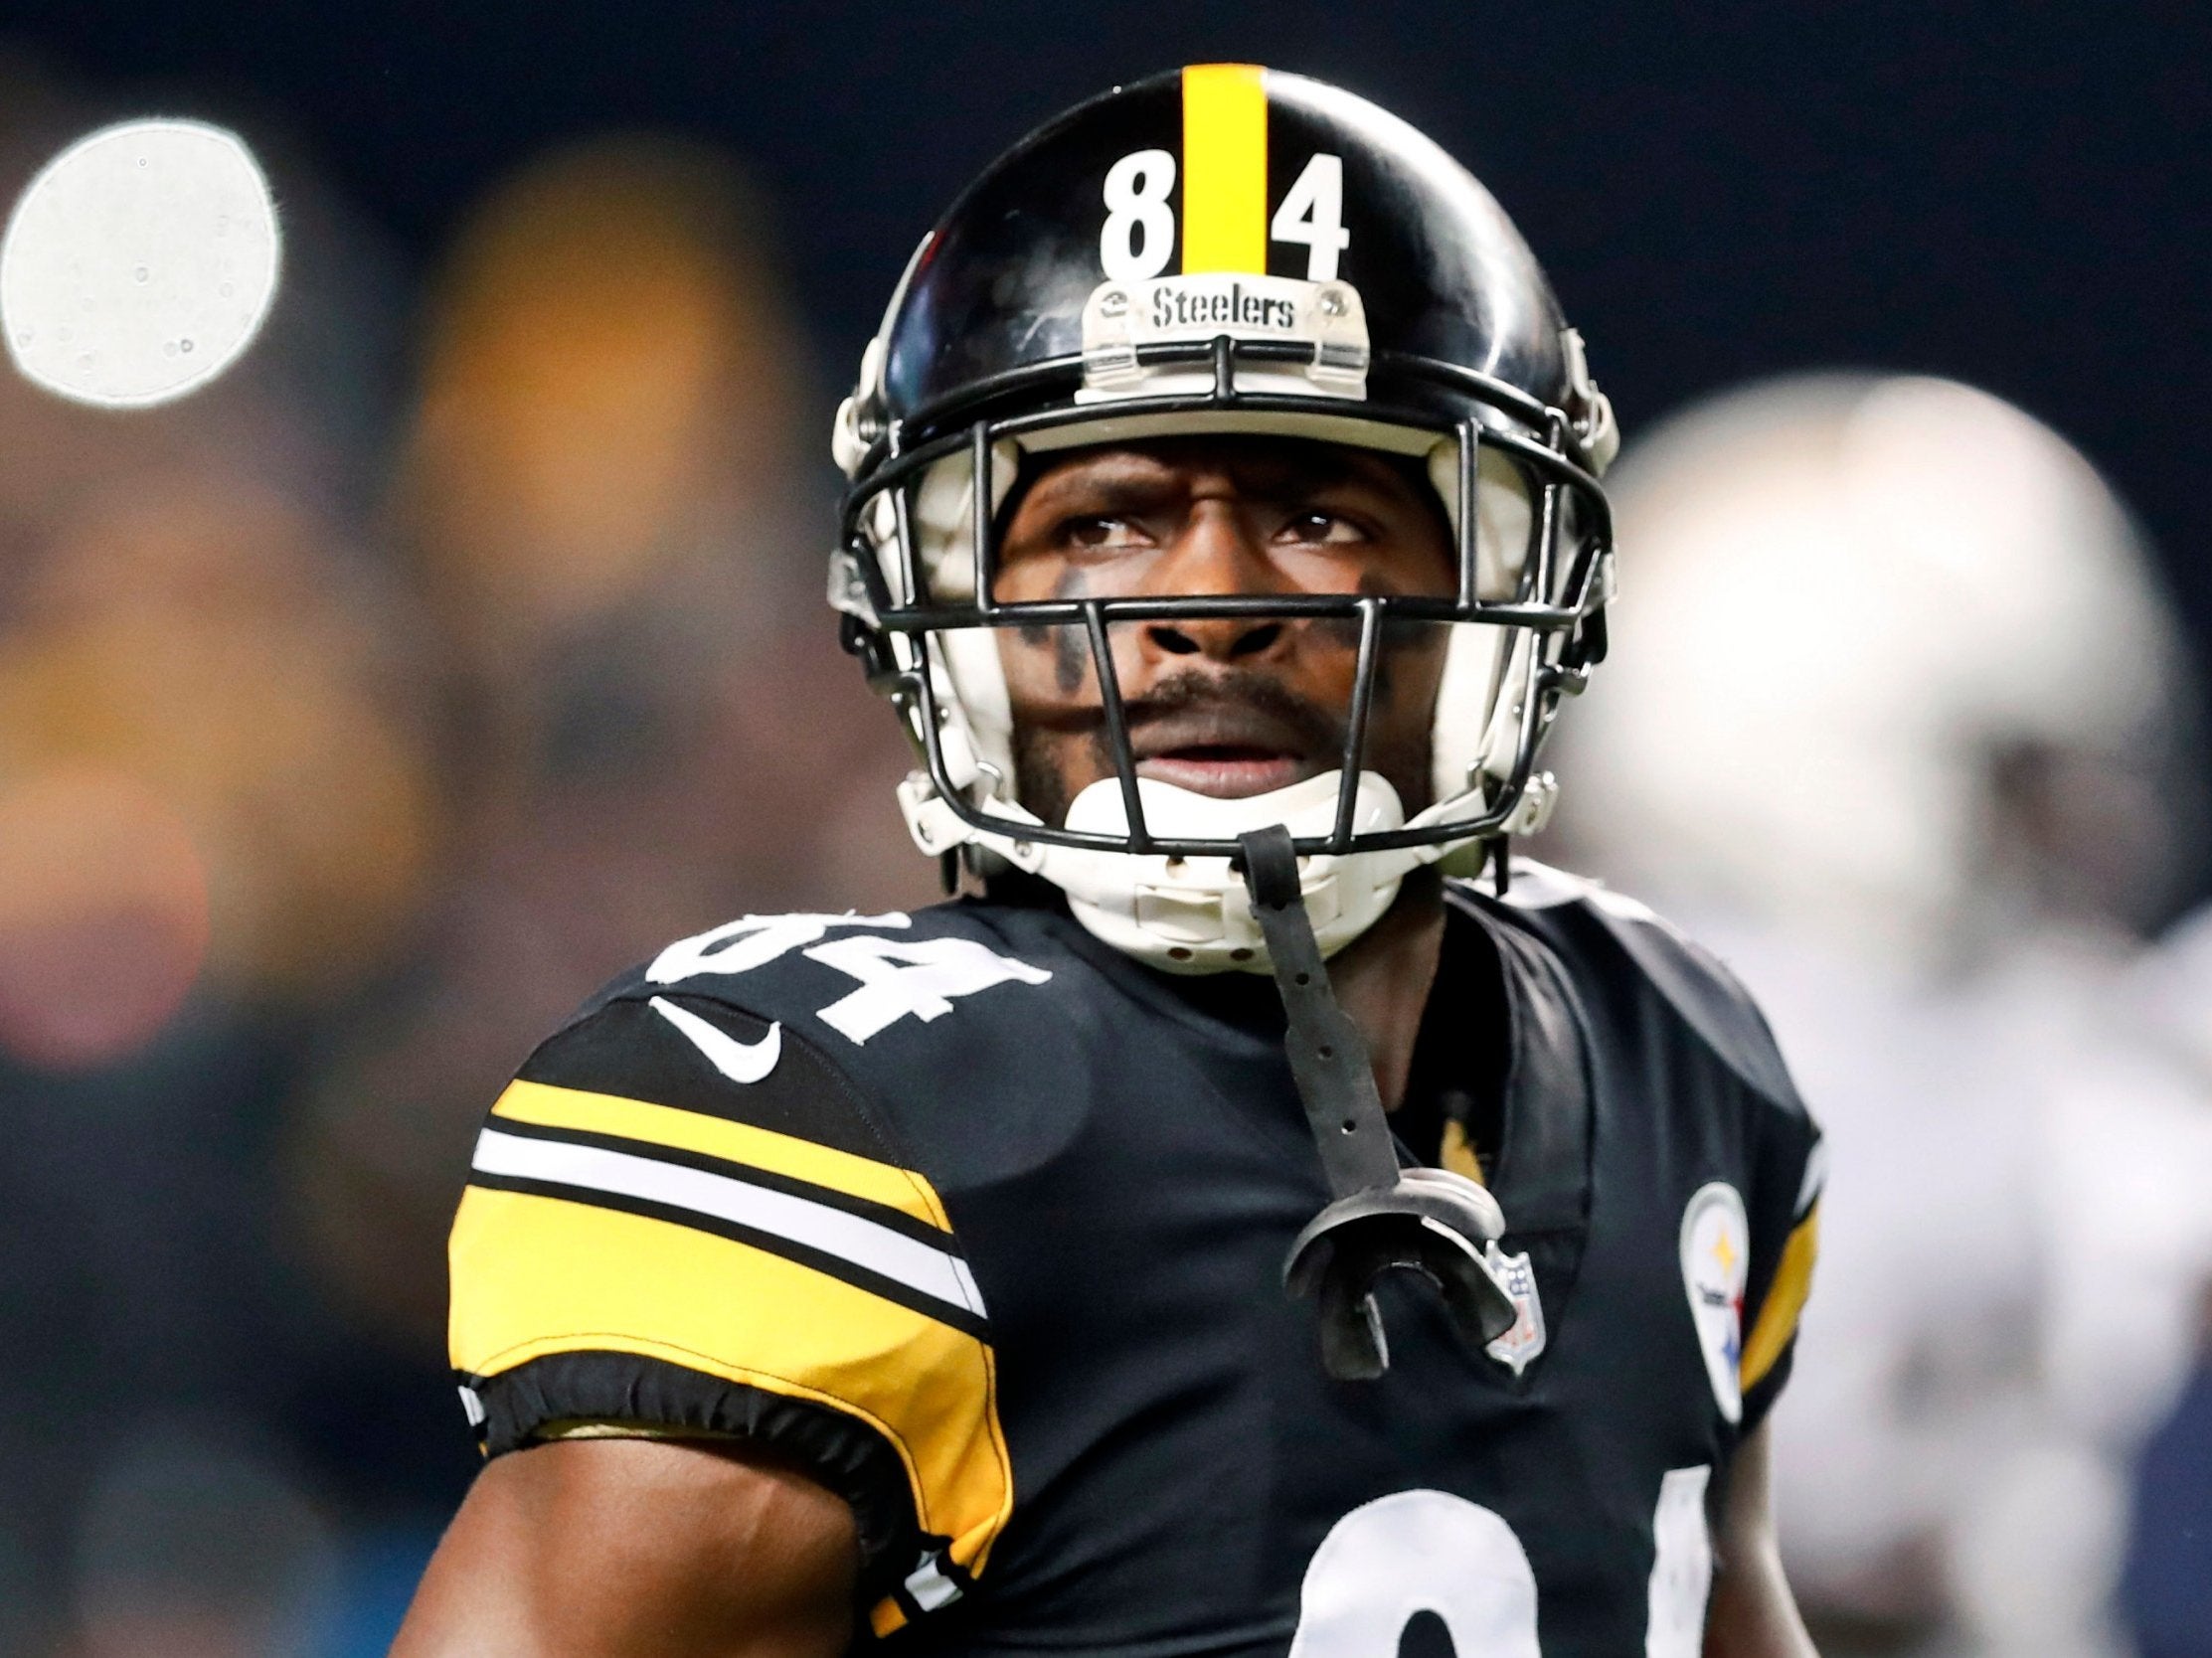 Pittsburgh Steelers wide receiver Antonio Brown has been traded to Oakland